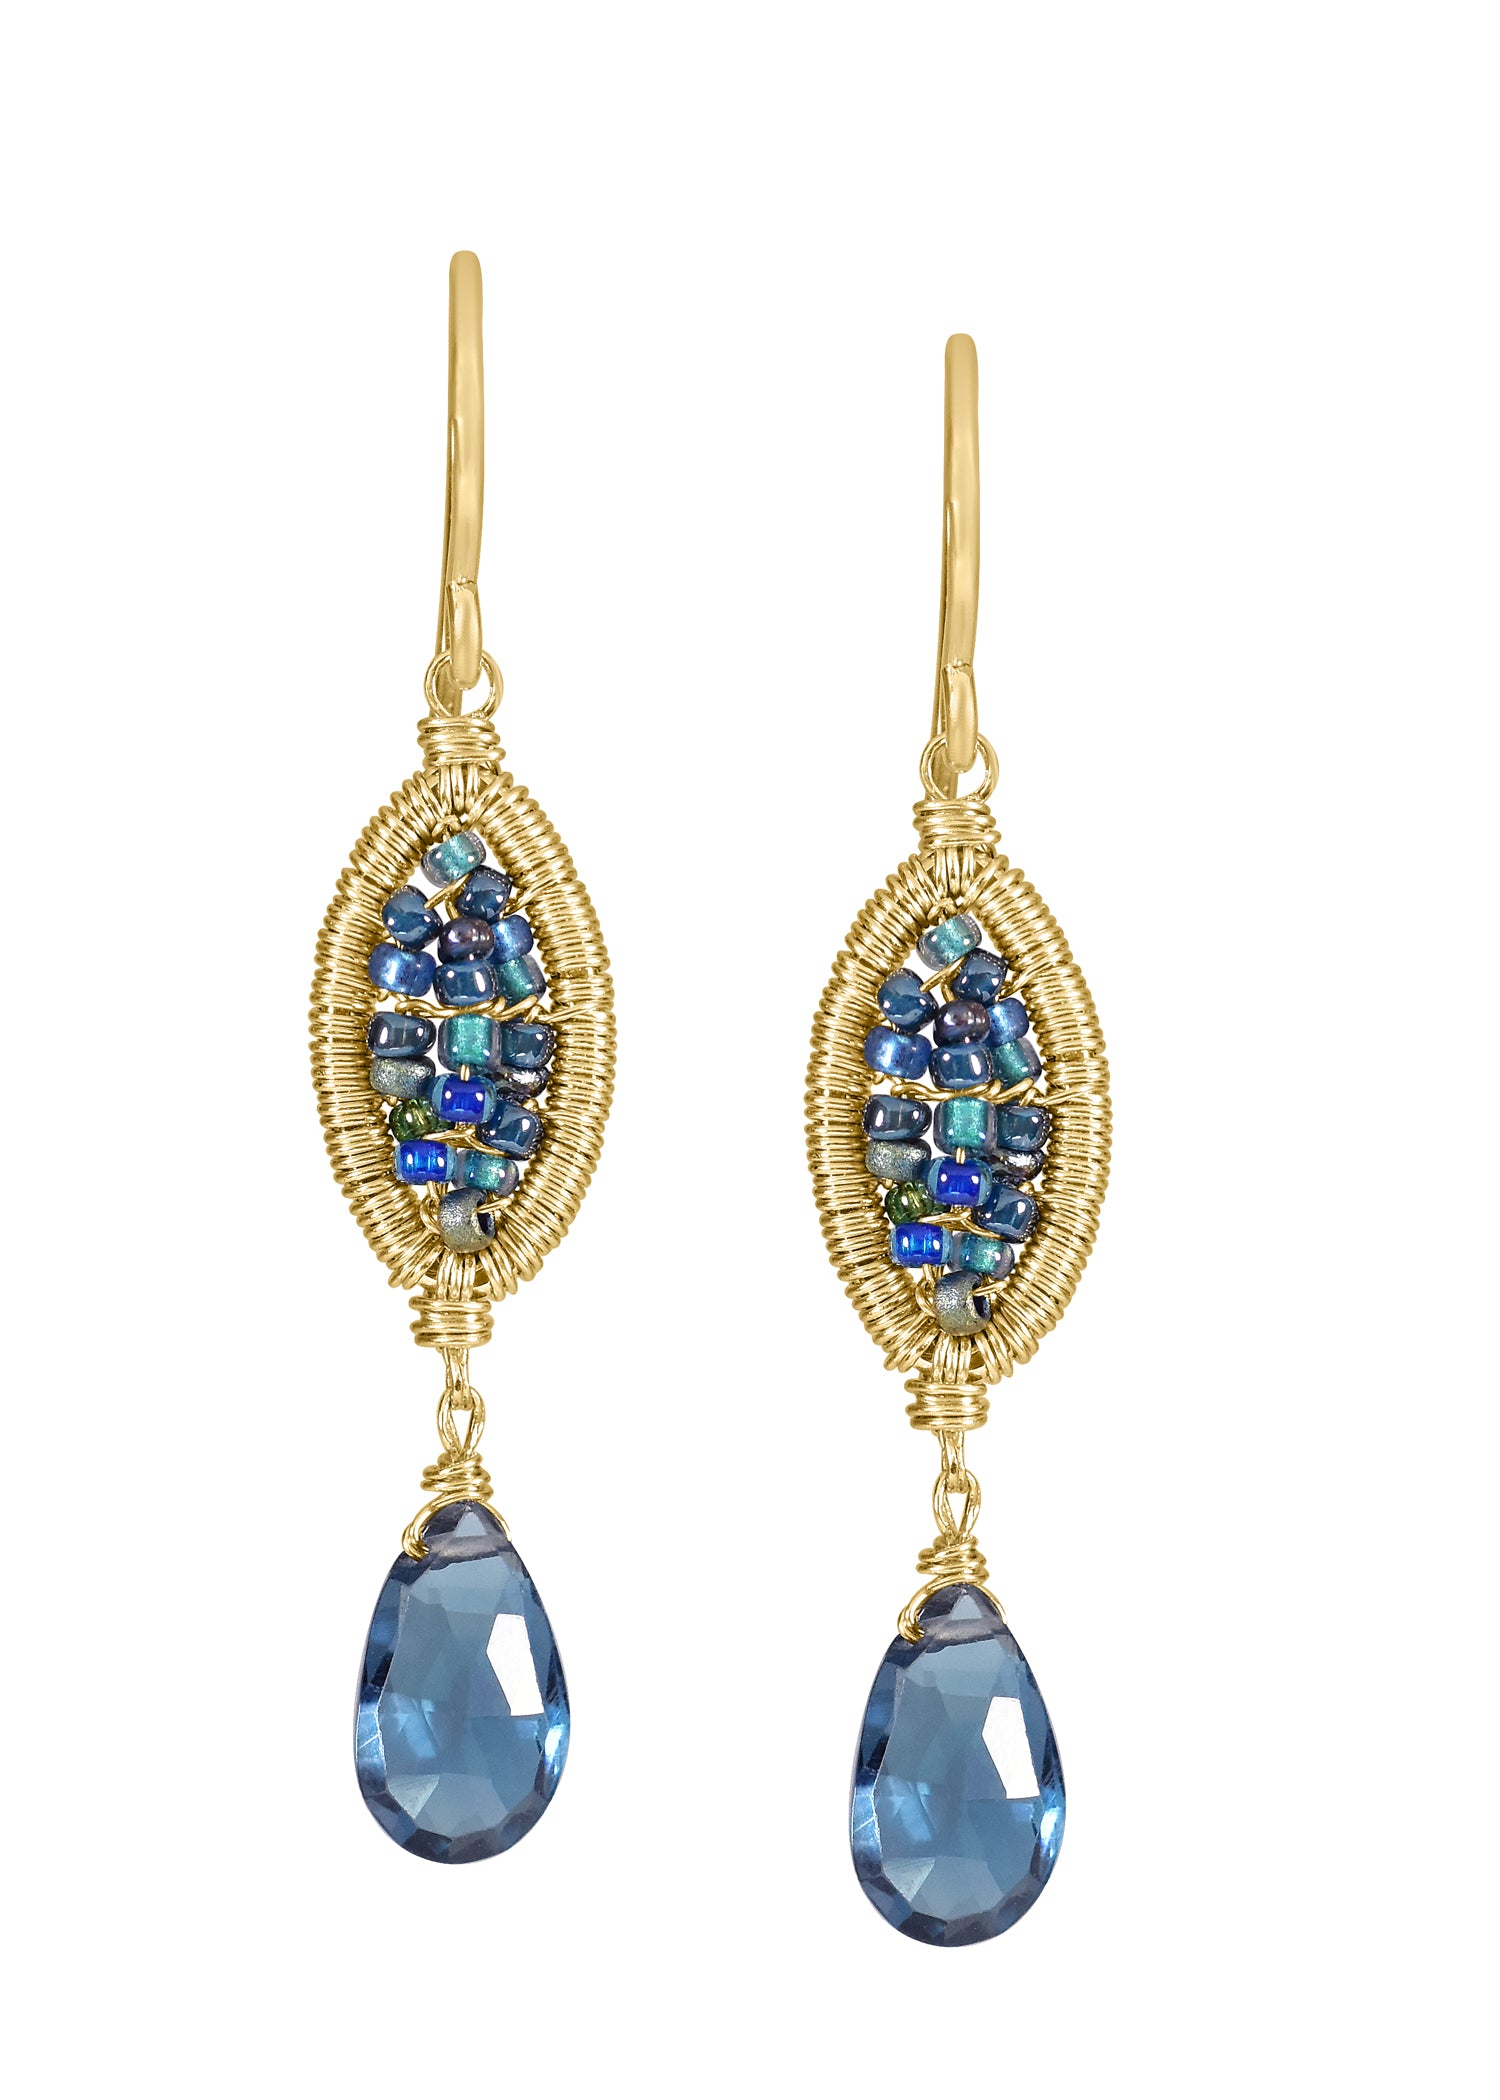 London blue topaz Seed beads 14k gold fill Earrings measure 1-1/2" in length (including the ear wires) and 1/4" in width at the widest point Handmade in our Los Angeles studio